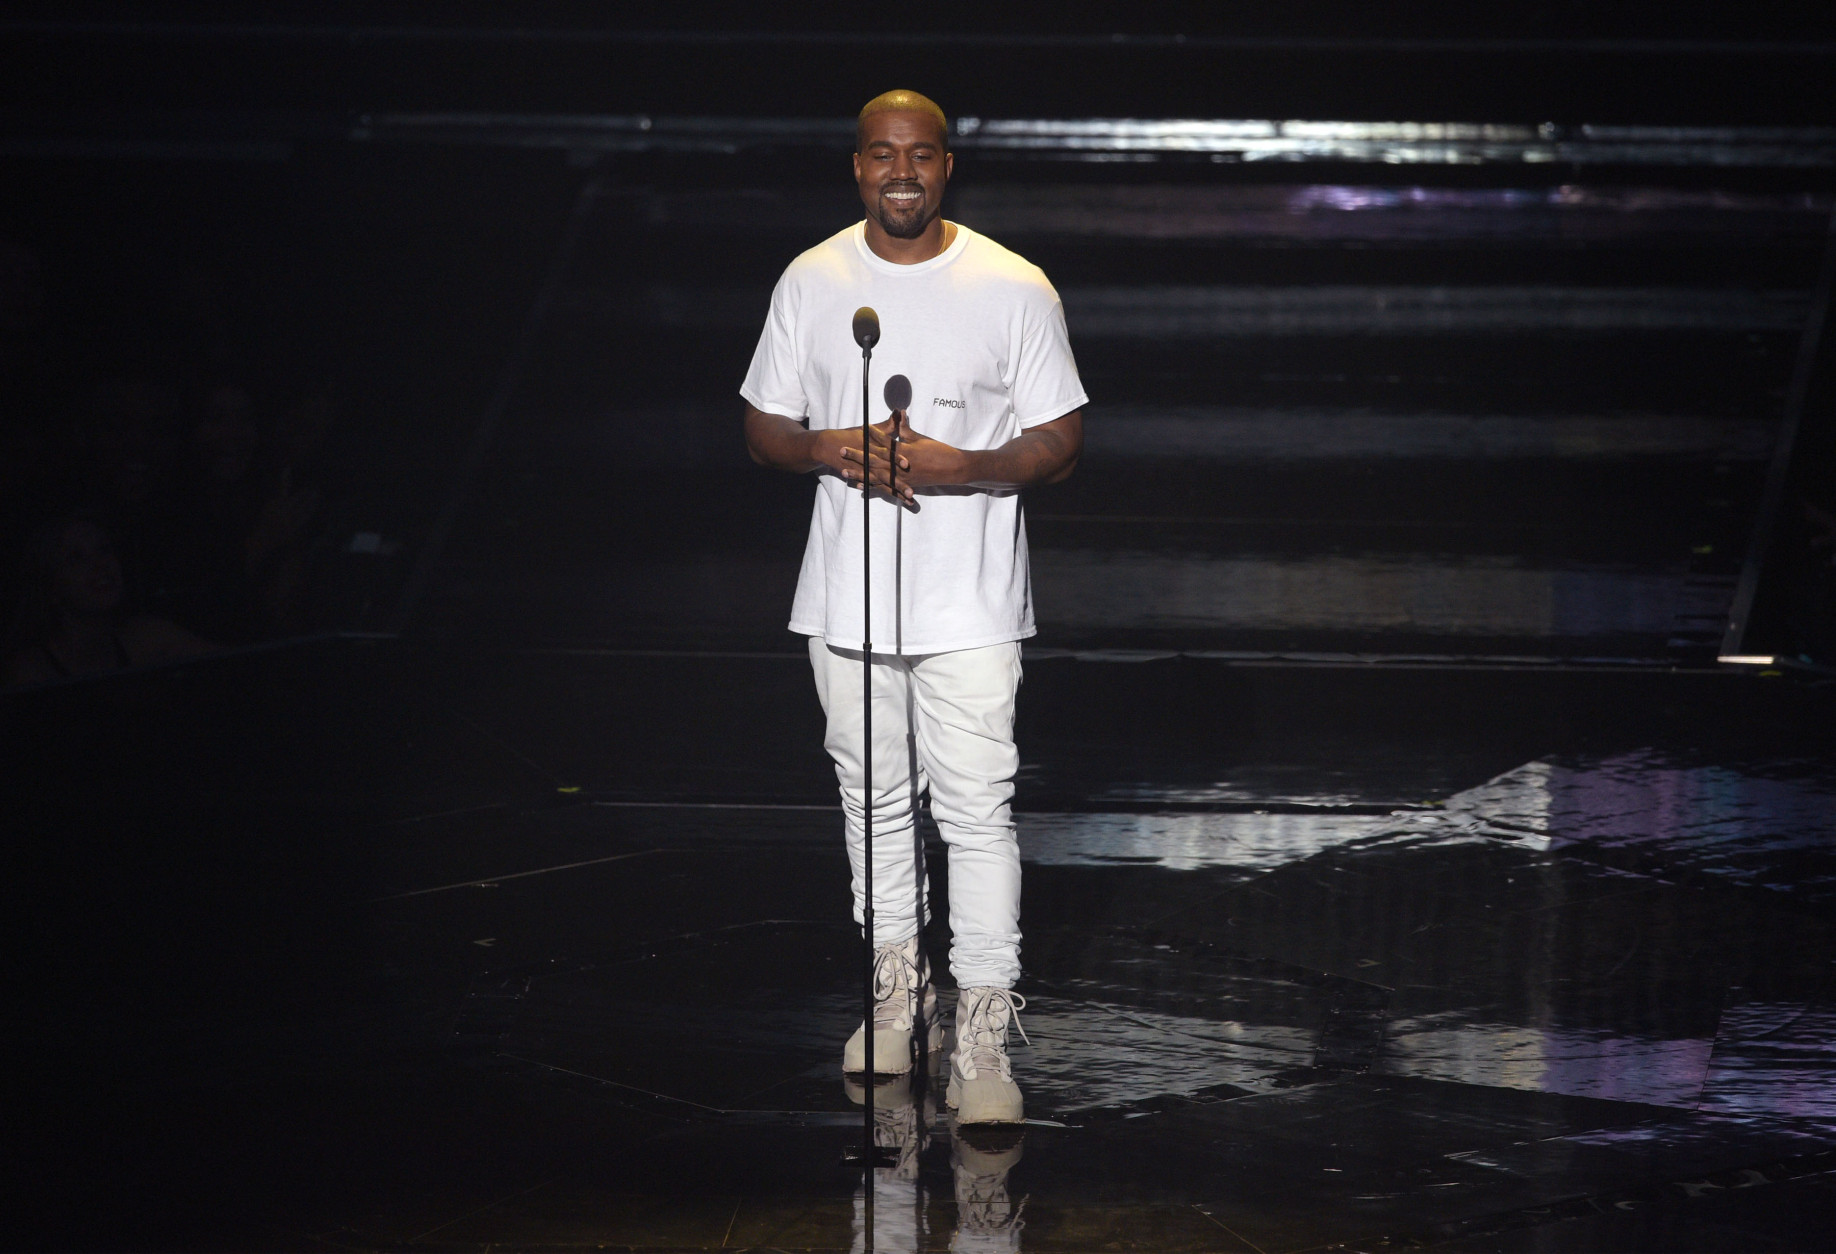 NEW YORK, NY - AUGUST 28:  Kanye West performs onstage during the 2016 MTV Video Music Awards at Madison Square Garden on August 28, 2016 in New York City.  (Photo by Jason Kempin/Getty Images)